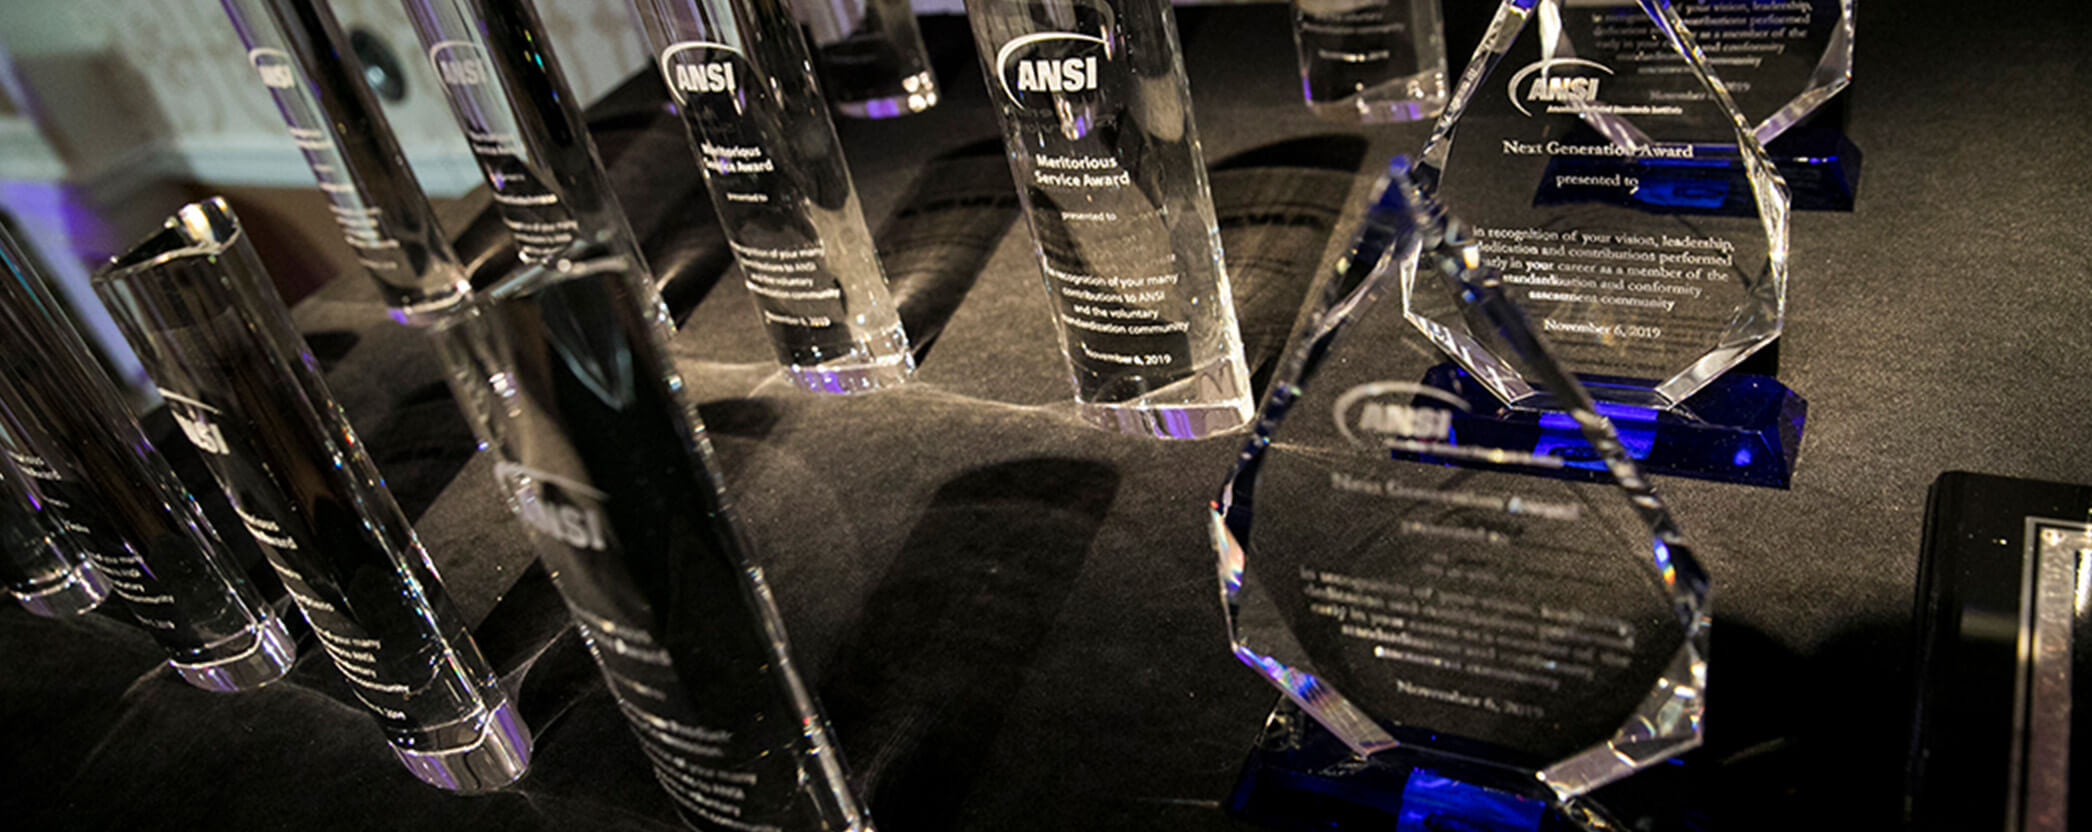 glass awards lined up on a table